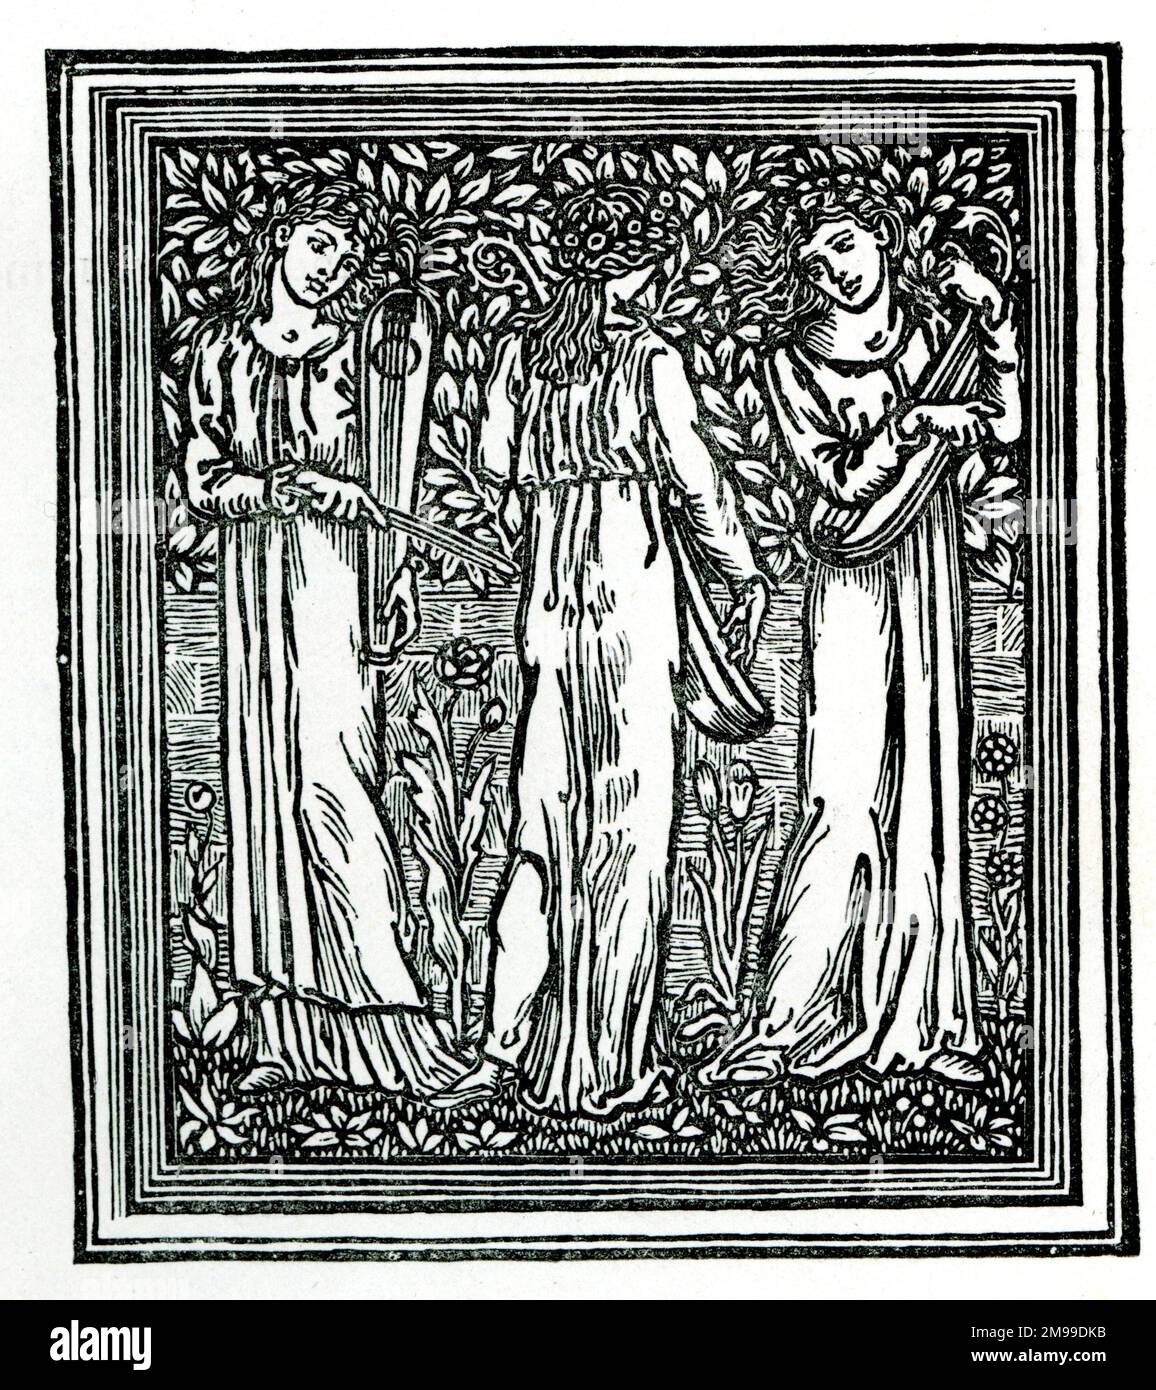 Illustration, The Earthly Paradise, an epic poem by William Morris. The Three Graces title page for the 1890 edition. Stock Photo